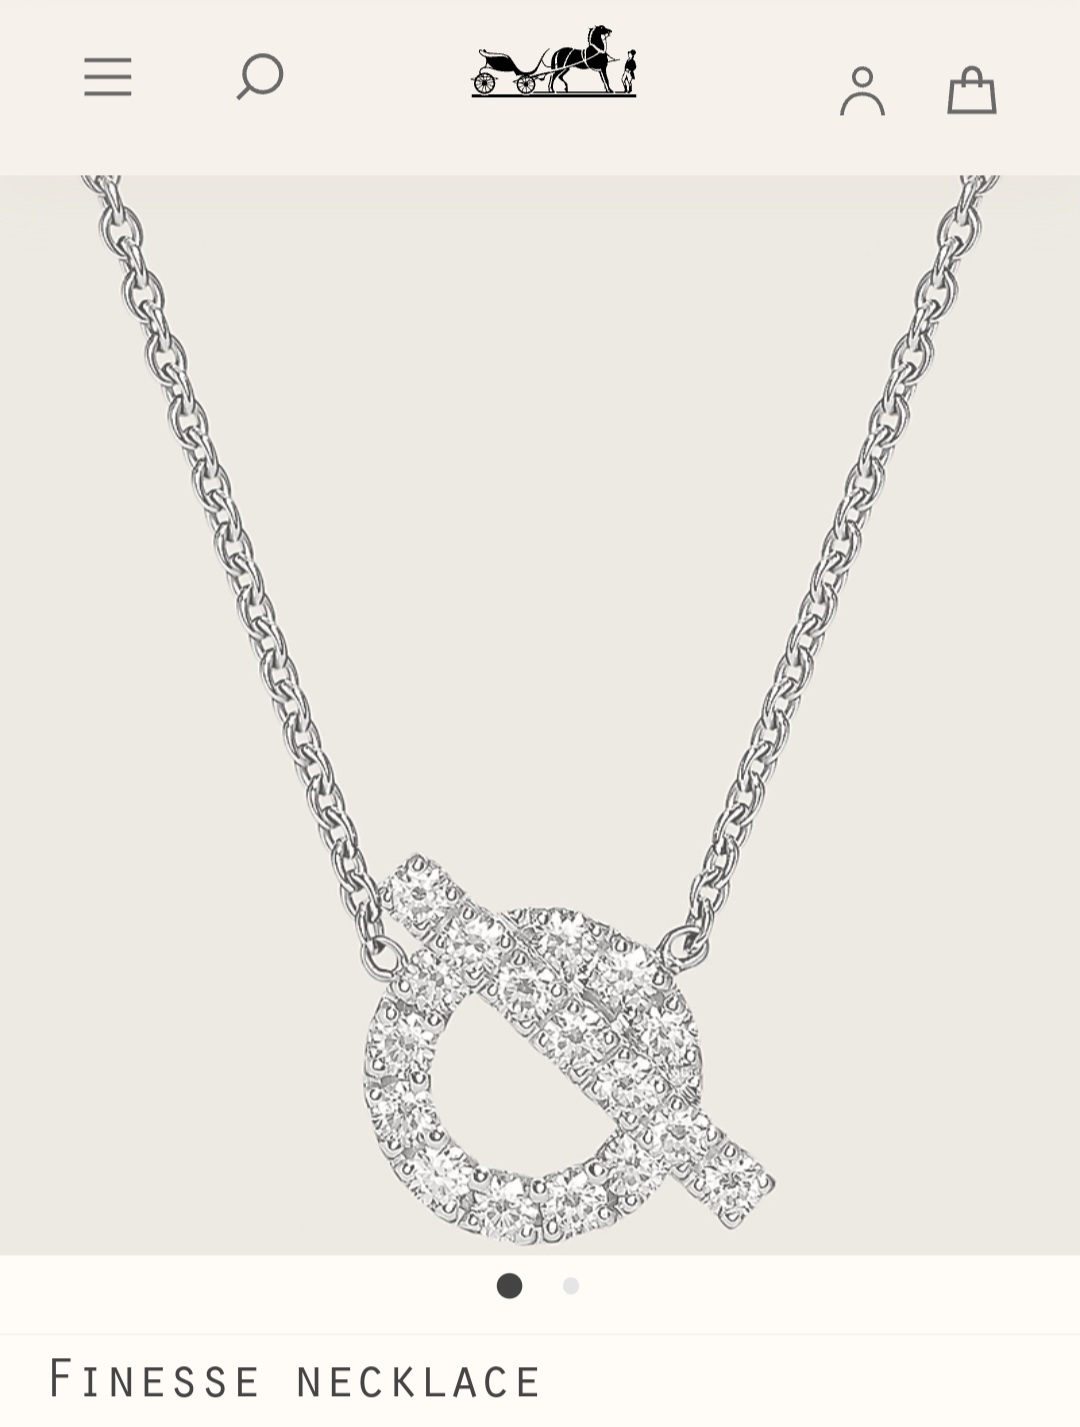 Hermes Finesse necklace